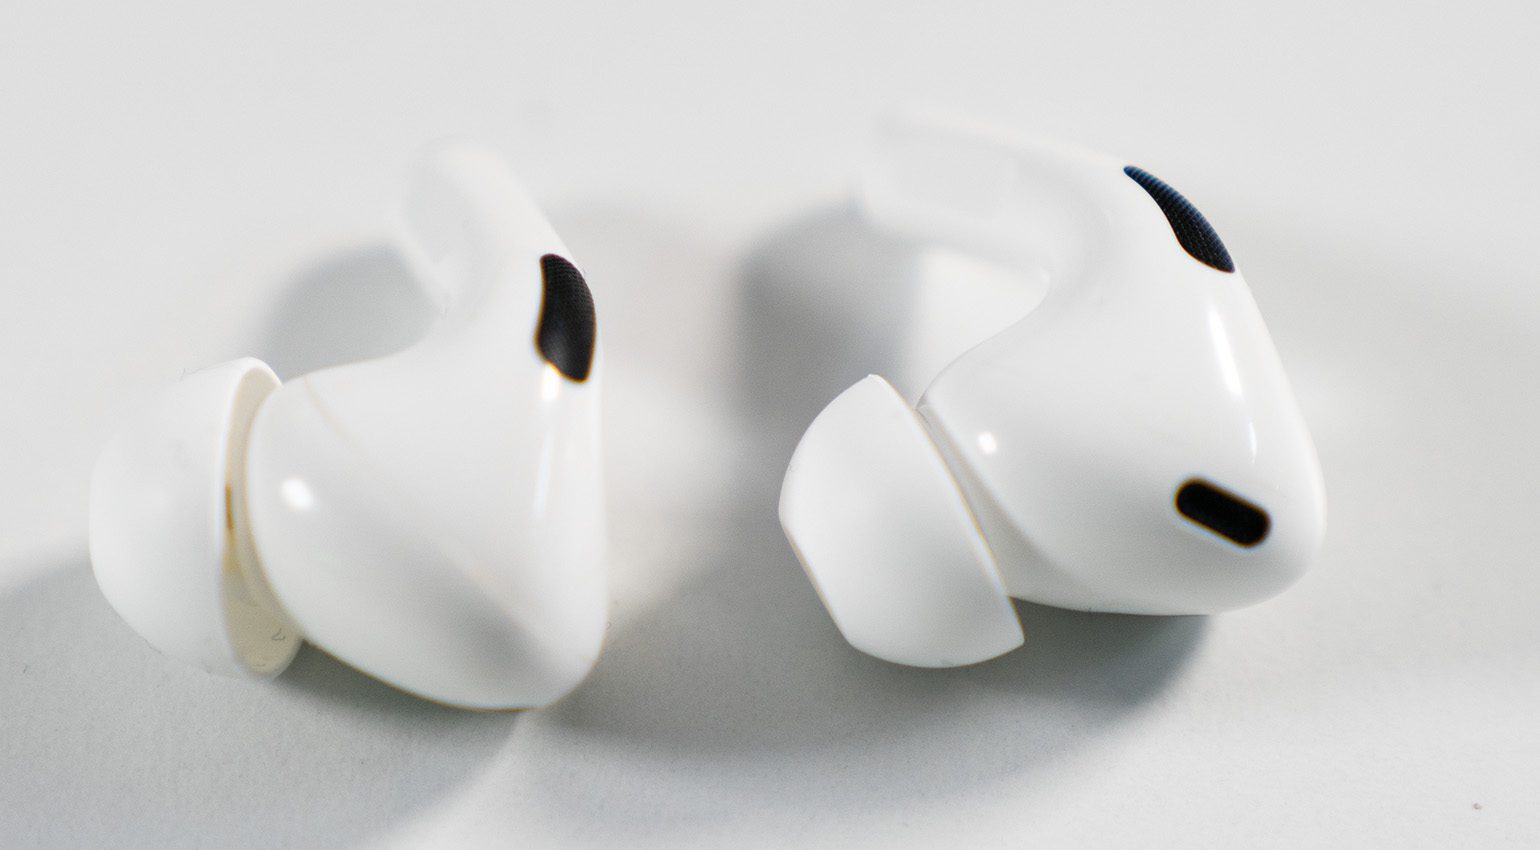 Review: Apple AirPods Pro 2. Generation In-Ear Headphones